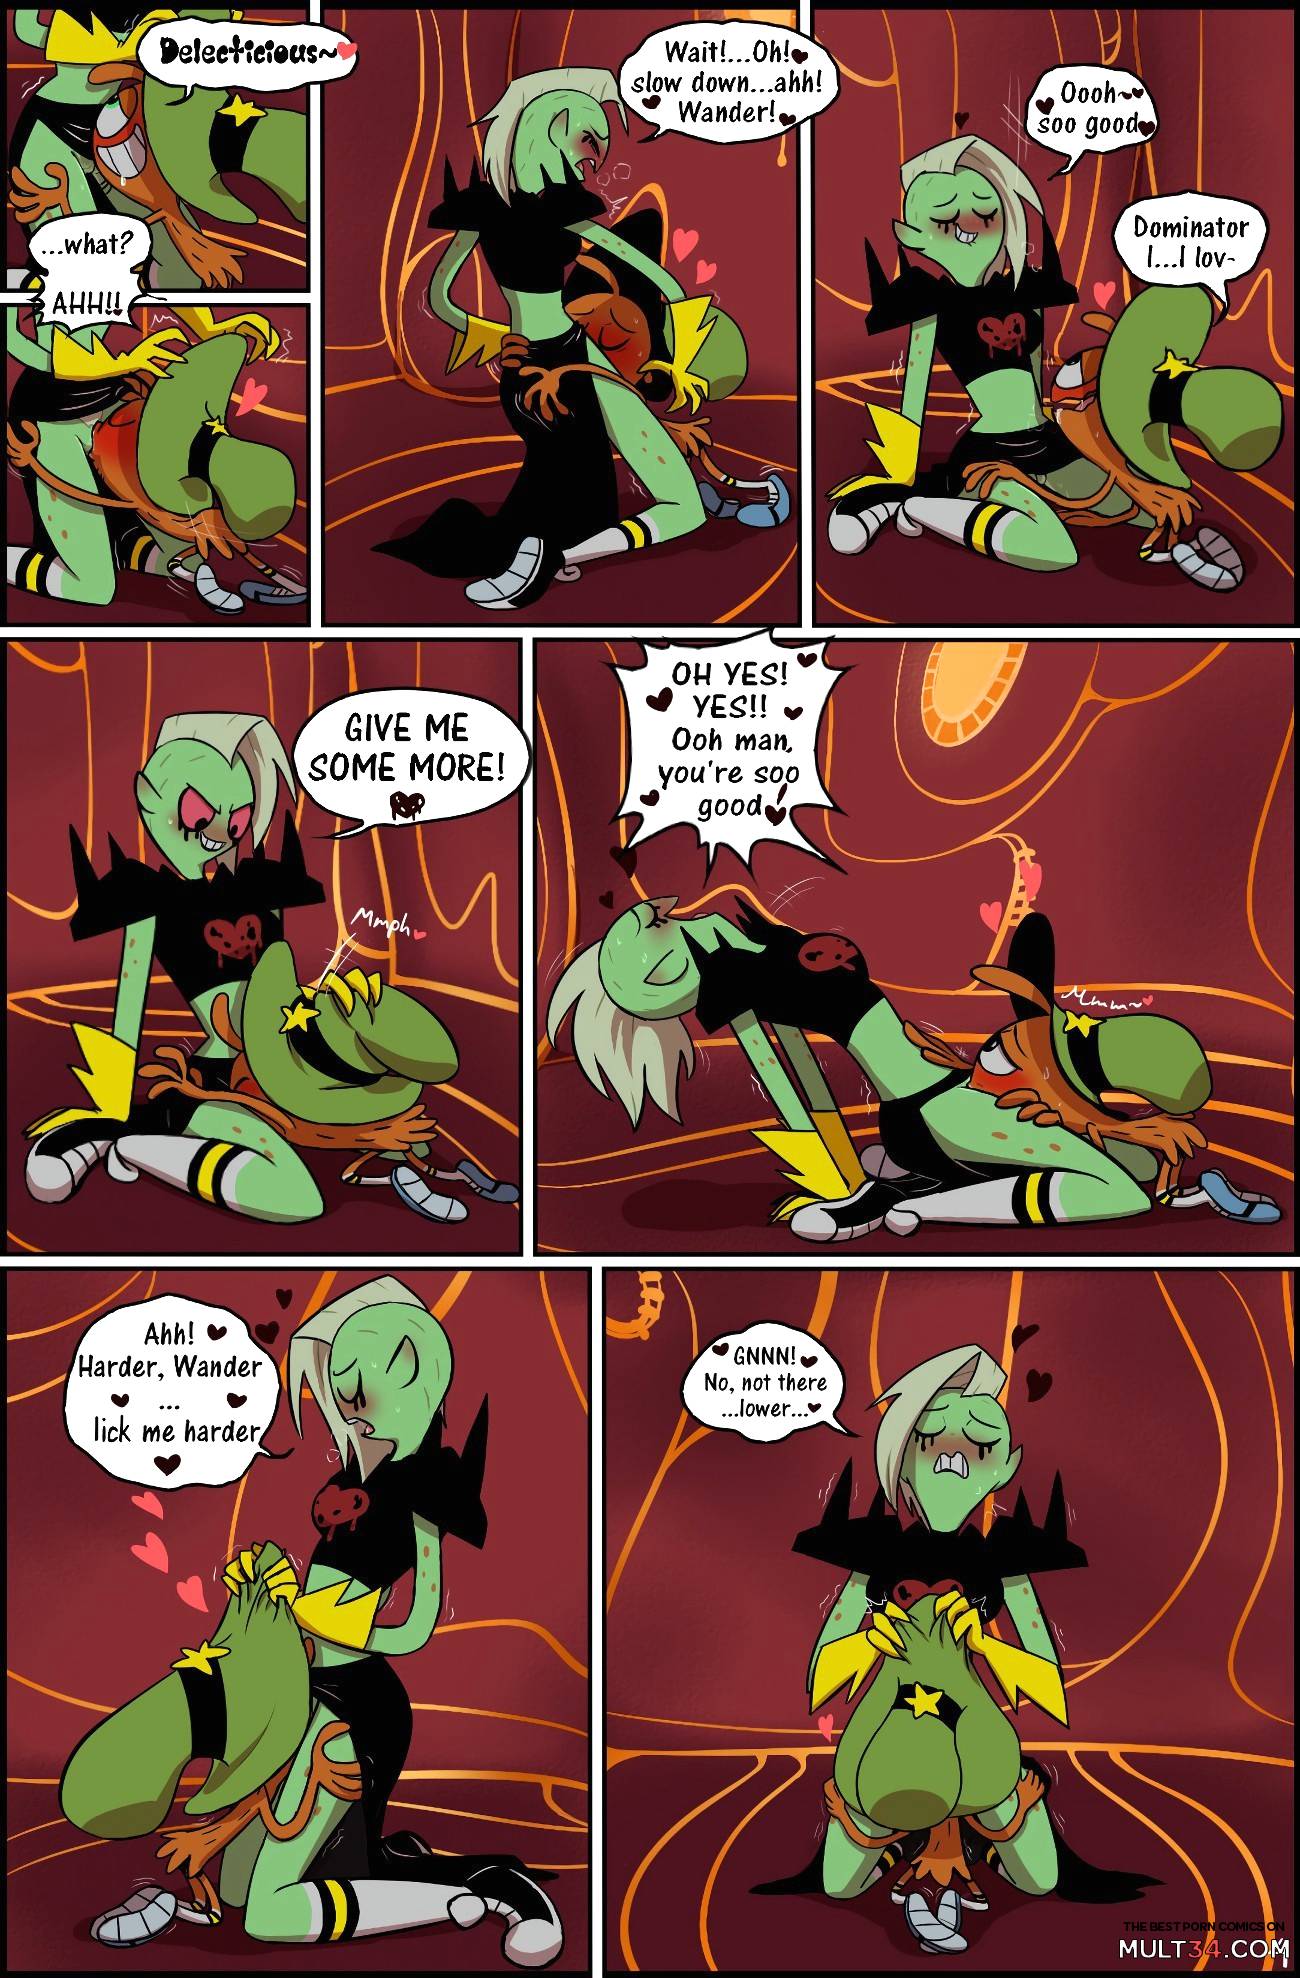 The Deal - Wander Over Yonder page 5